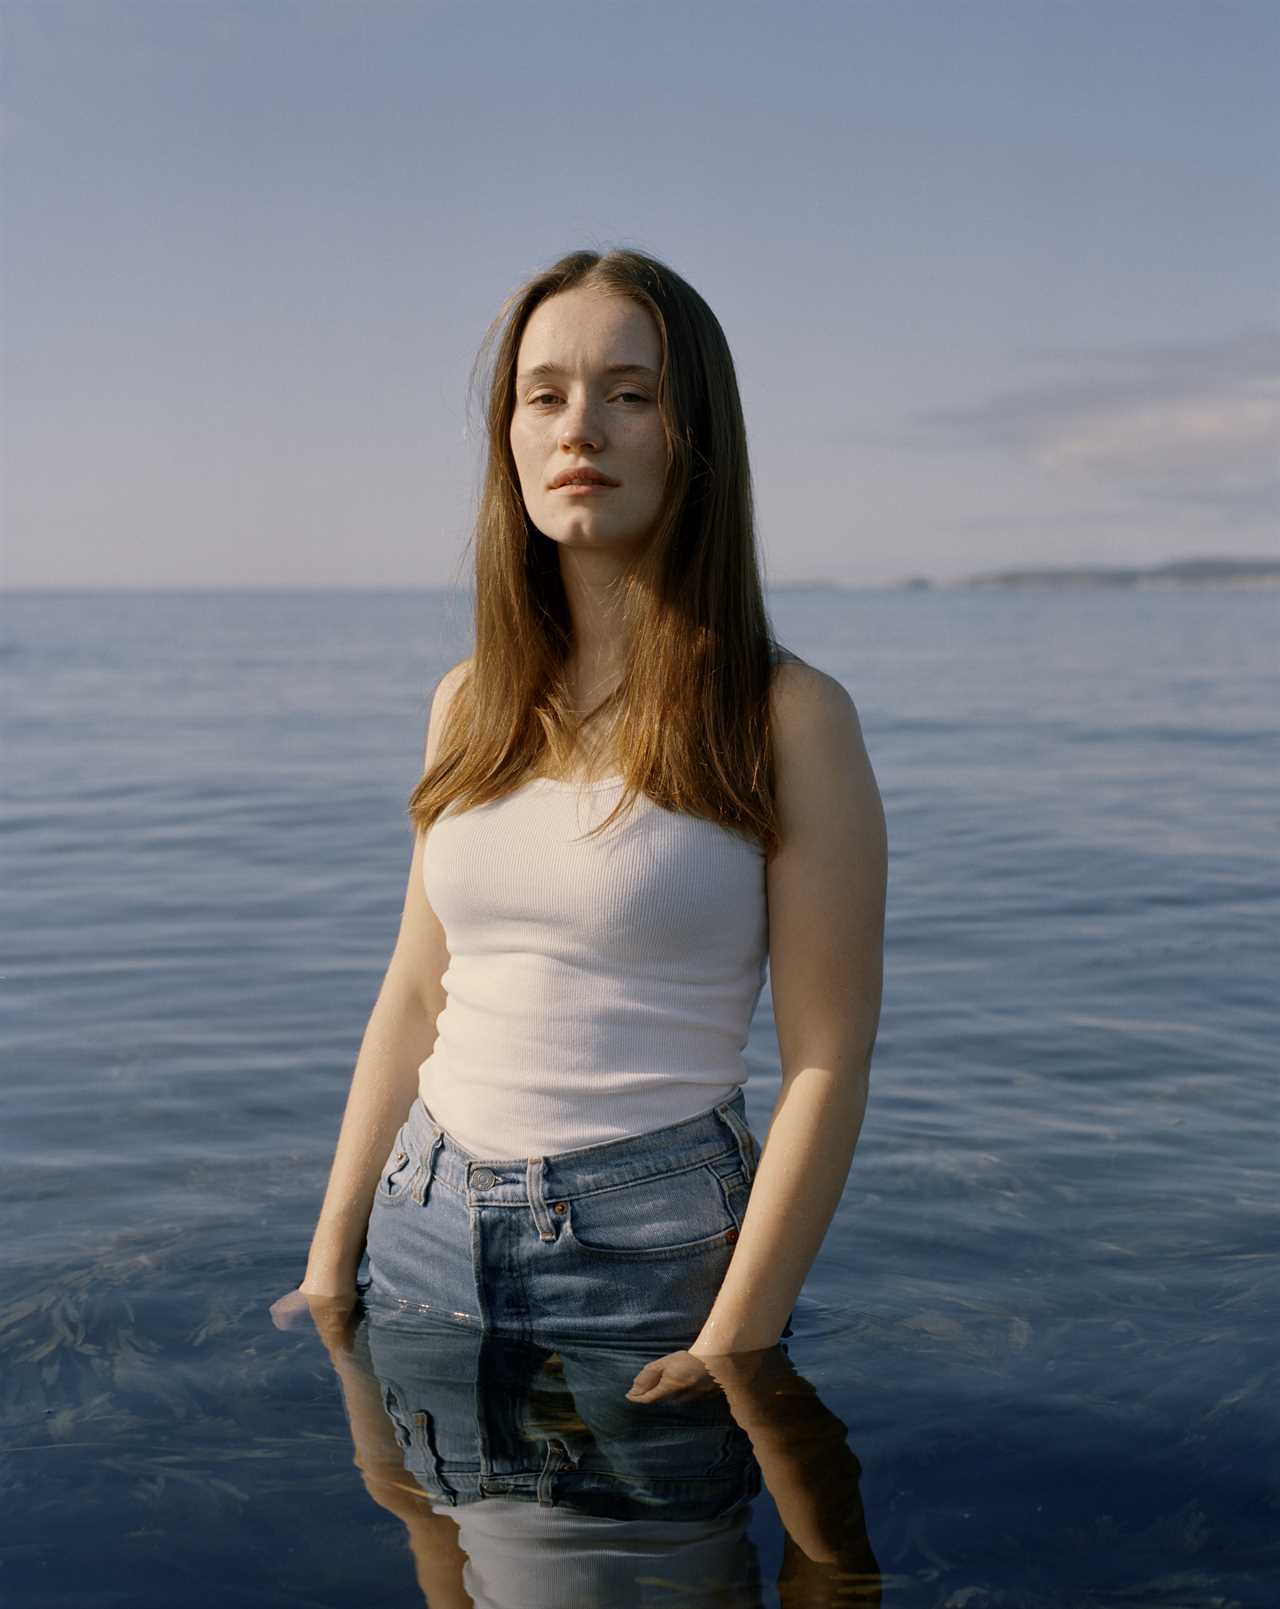 Norwegian popstar Sigrid on her incredible and whirlwind rise to the top